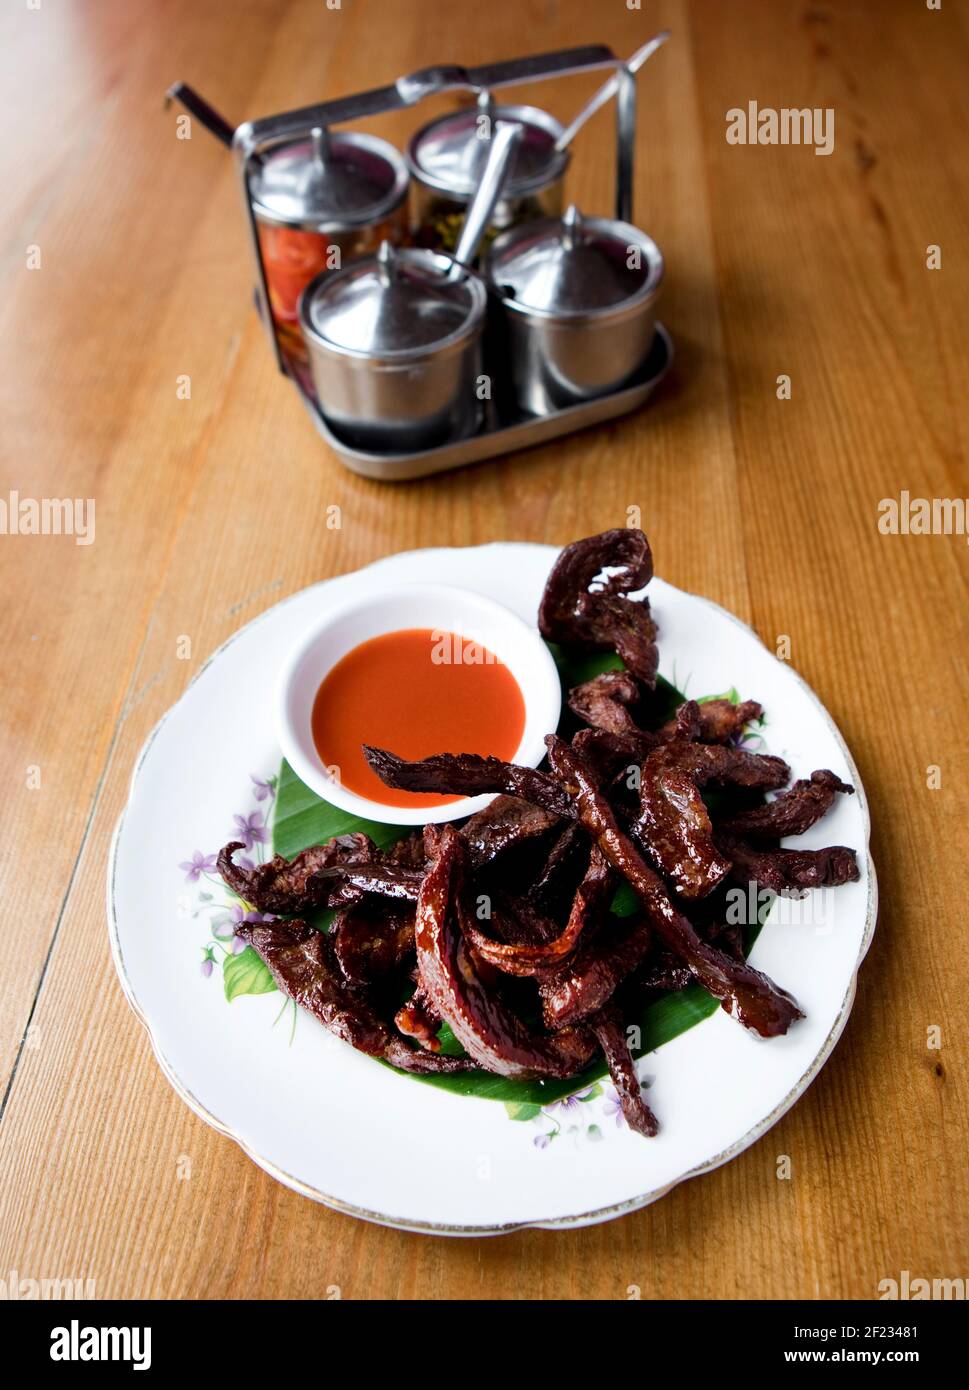 101 Thai Kitchen Pic Shows:  Salted Beef Stock Photo